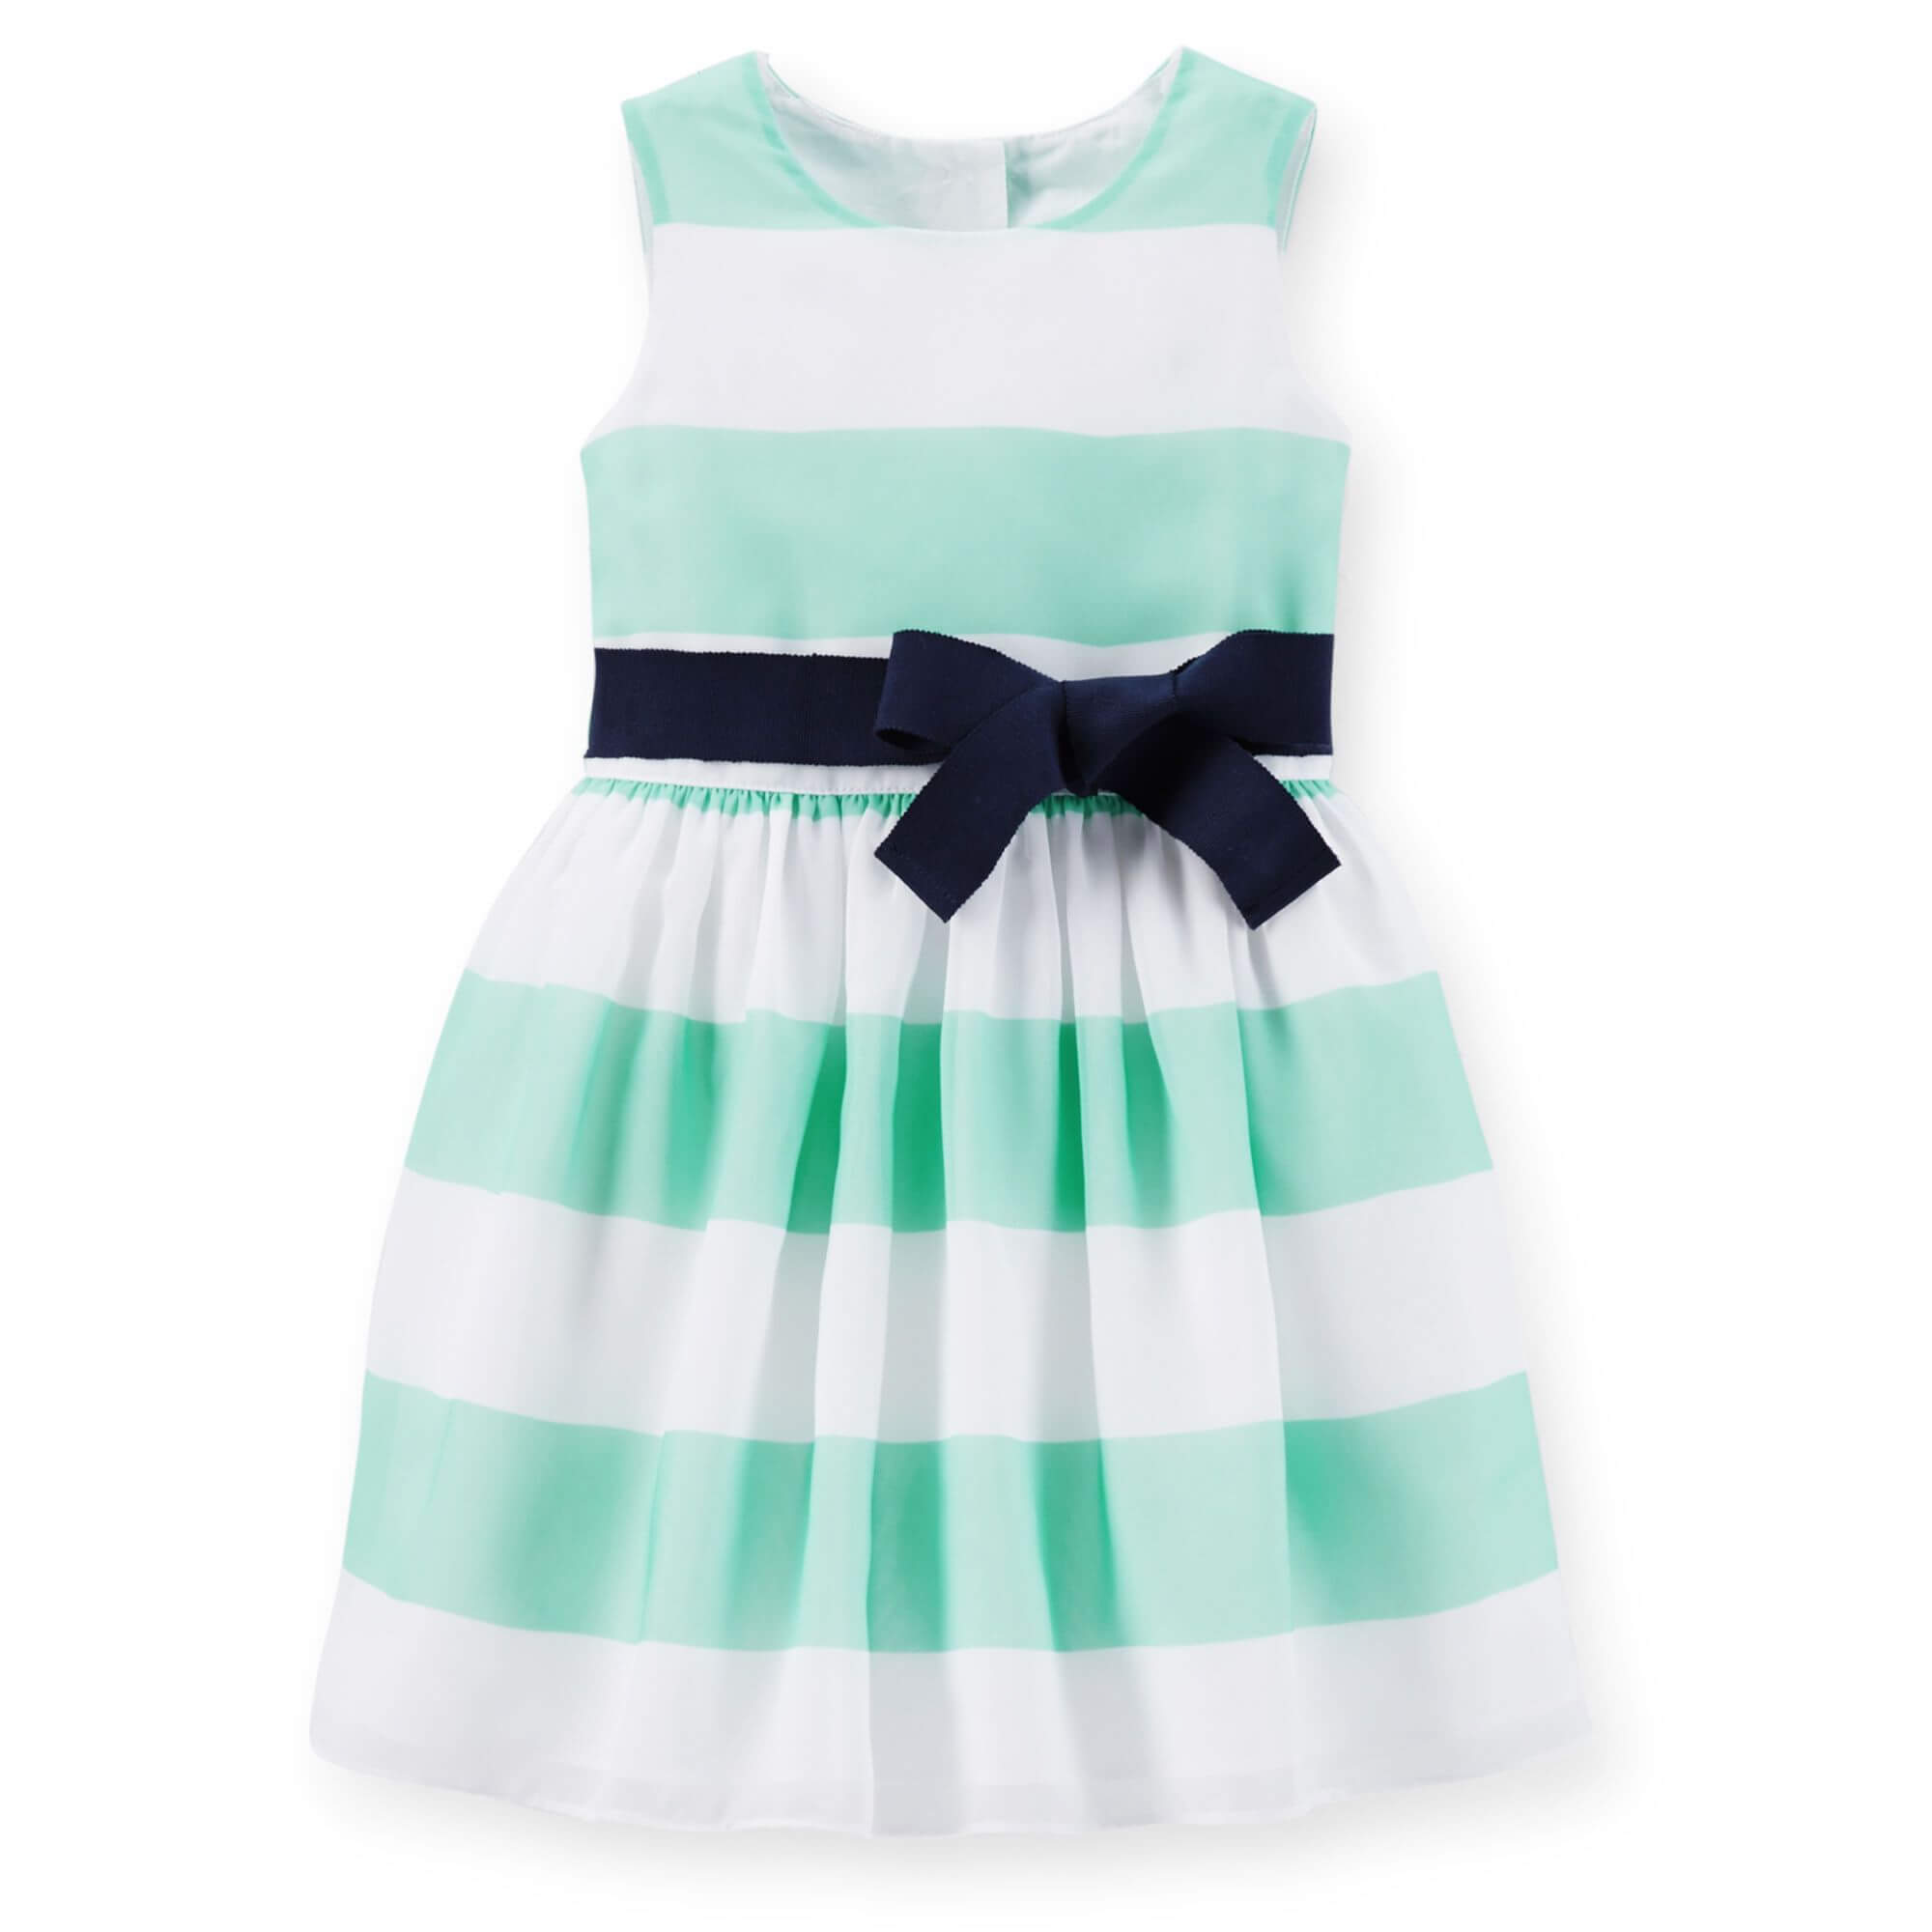 Irresistibly Cute Baby Outfits For Easter